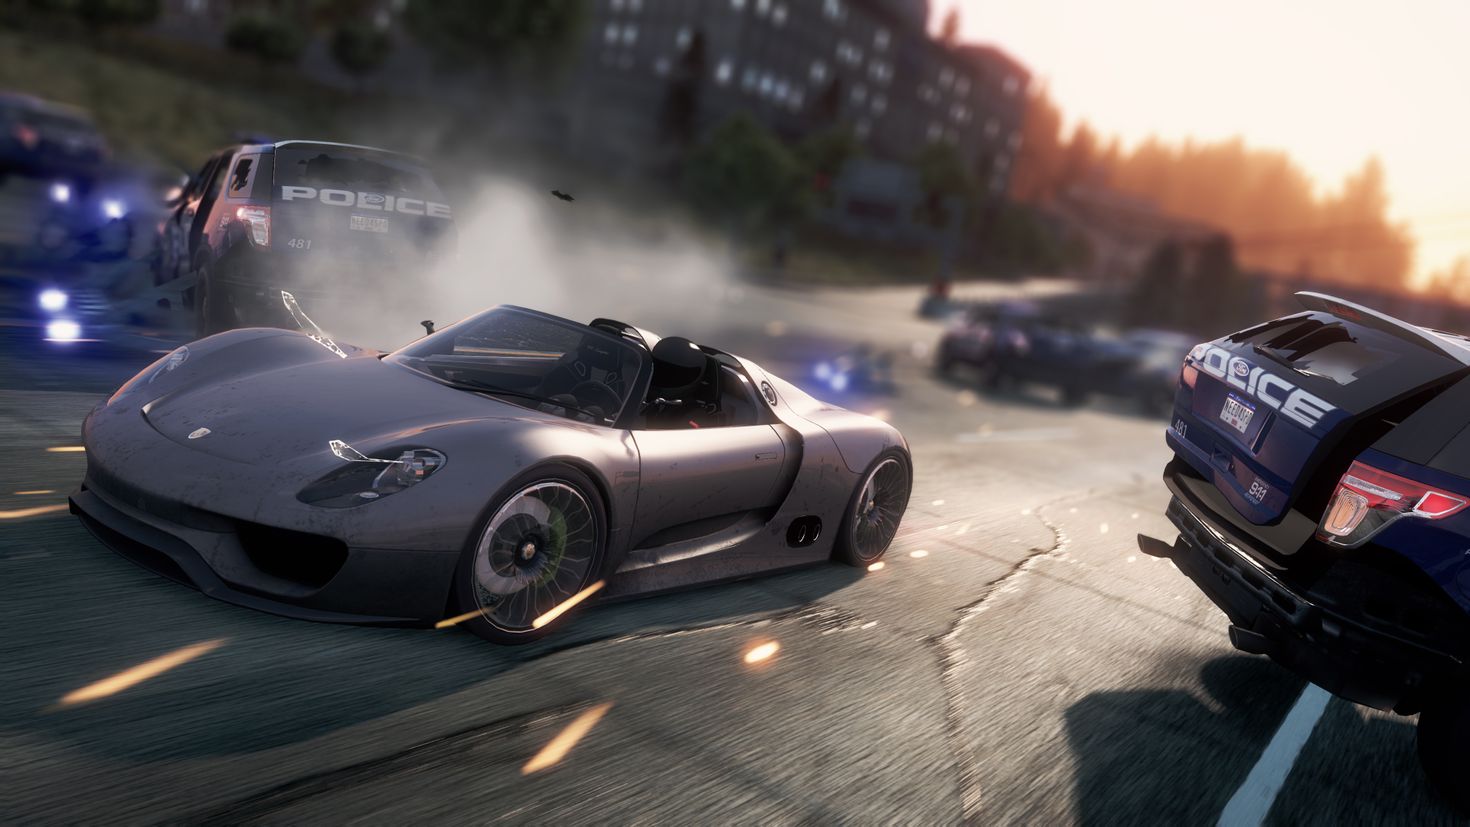 Need for speed wanted game. Need for Speed most wanted 2012. Porsche 918 Spyder Concept most wanted 2012. NFS most wanted 2012 Порше 918 Спайдер. Нфс most wanted 2012.